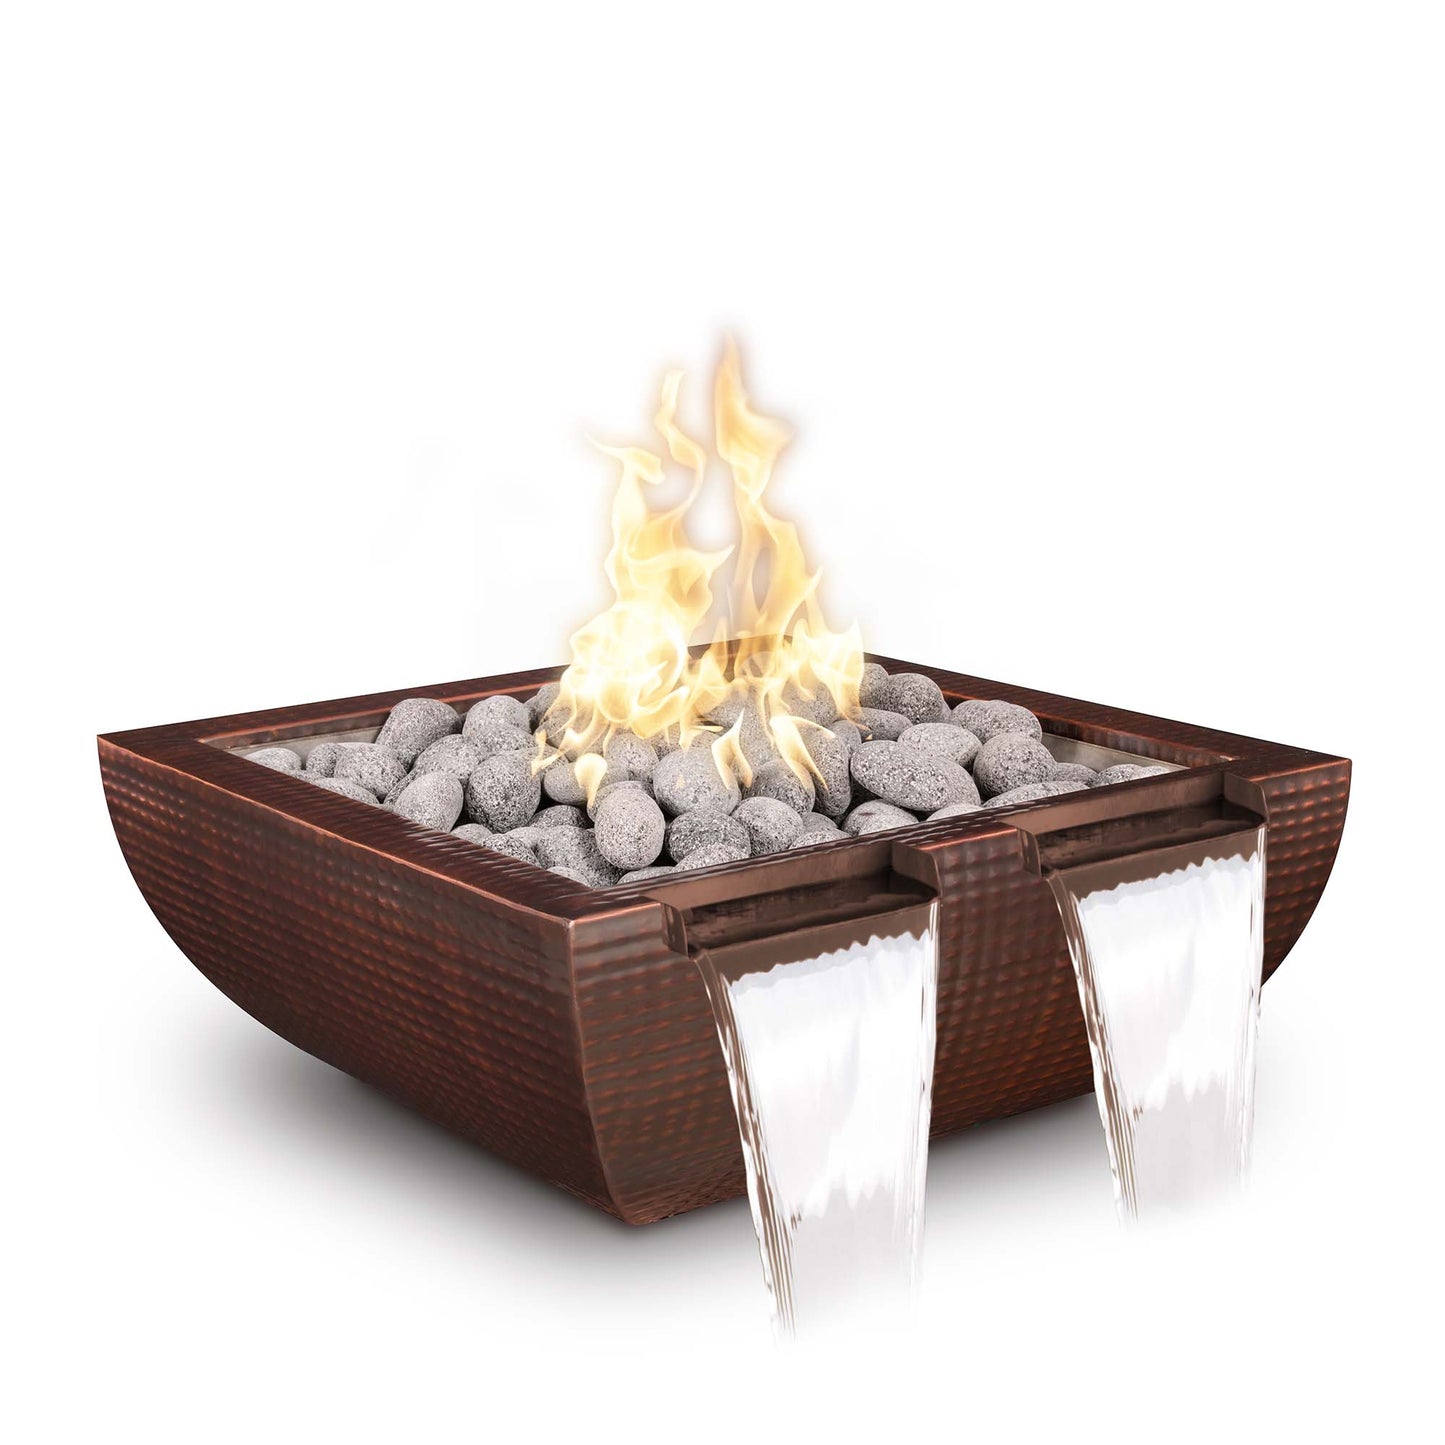 The Outdoor Plus Avalon Twin Spill 30" Copper Vein Powder Coated Metal Liquid Propane Fire & Water Bowl with Match Lit with Flame Sense Ignition